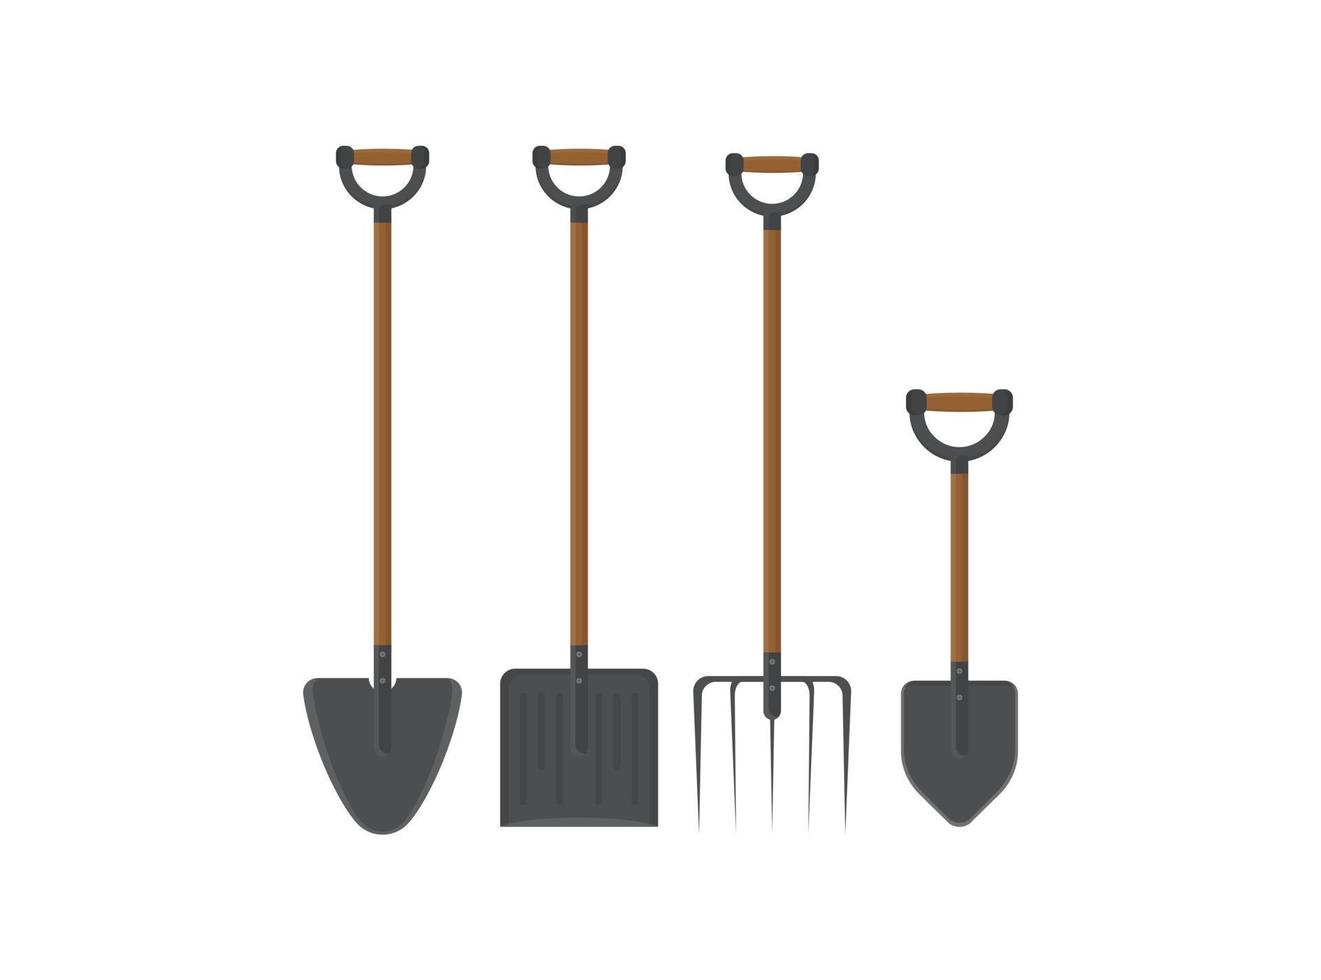 Short Handle Shovel and Spade is a three color illustration. Wooden handle and fiberglass handle included. vector